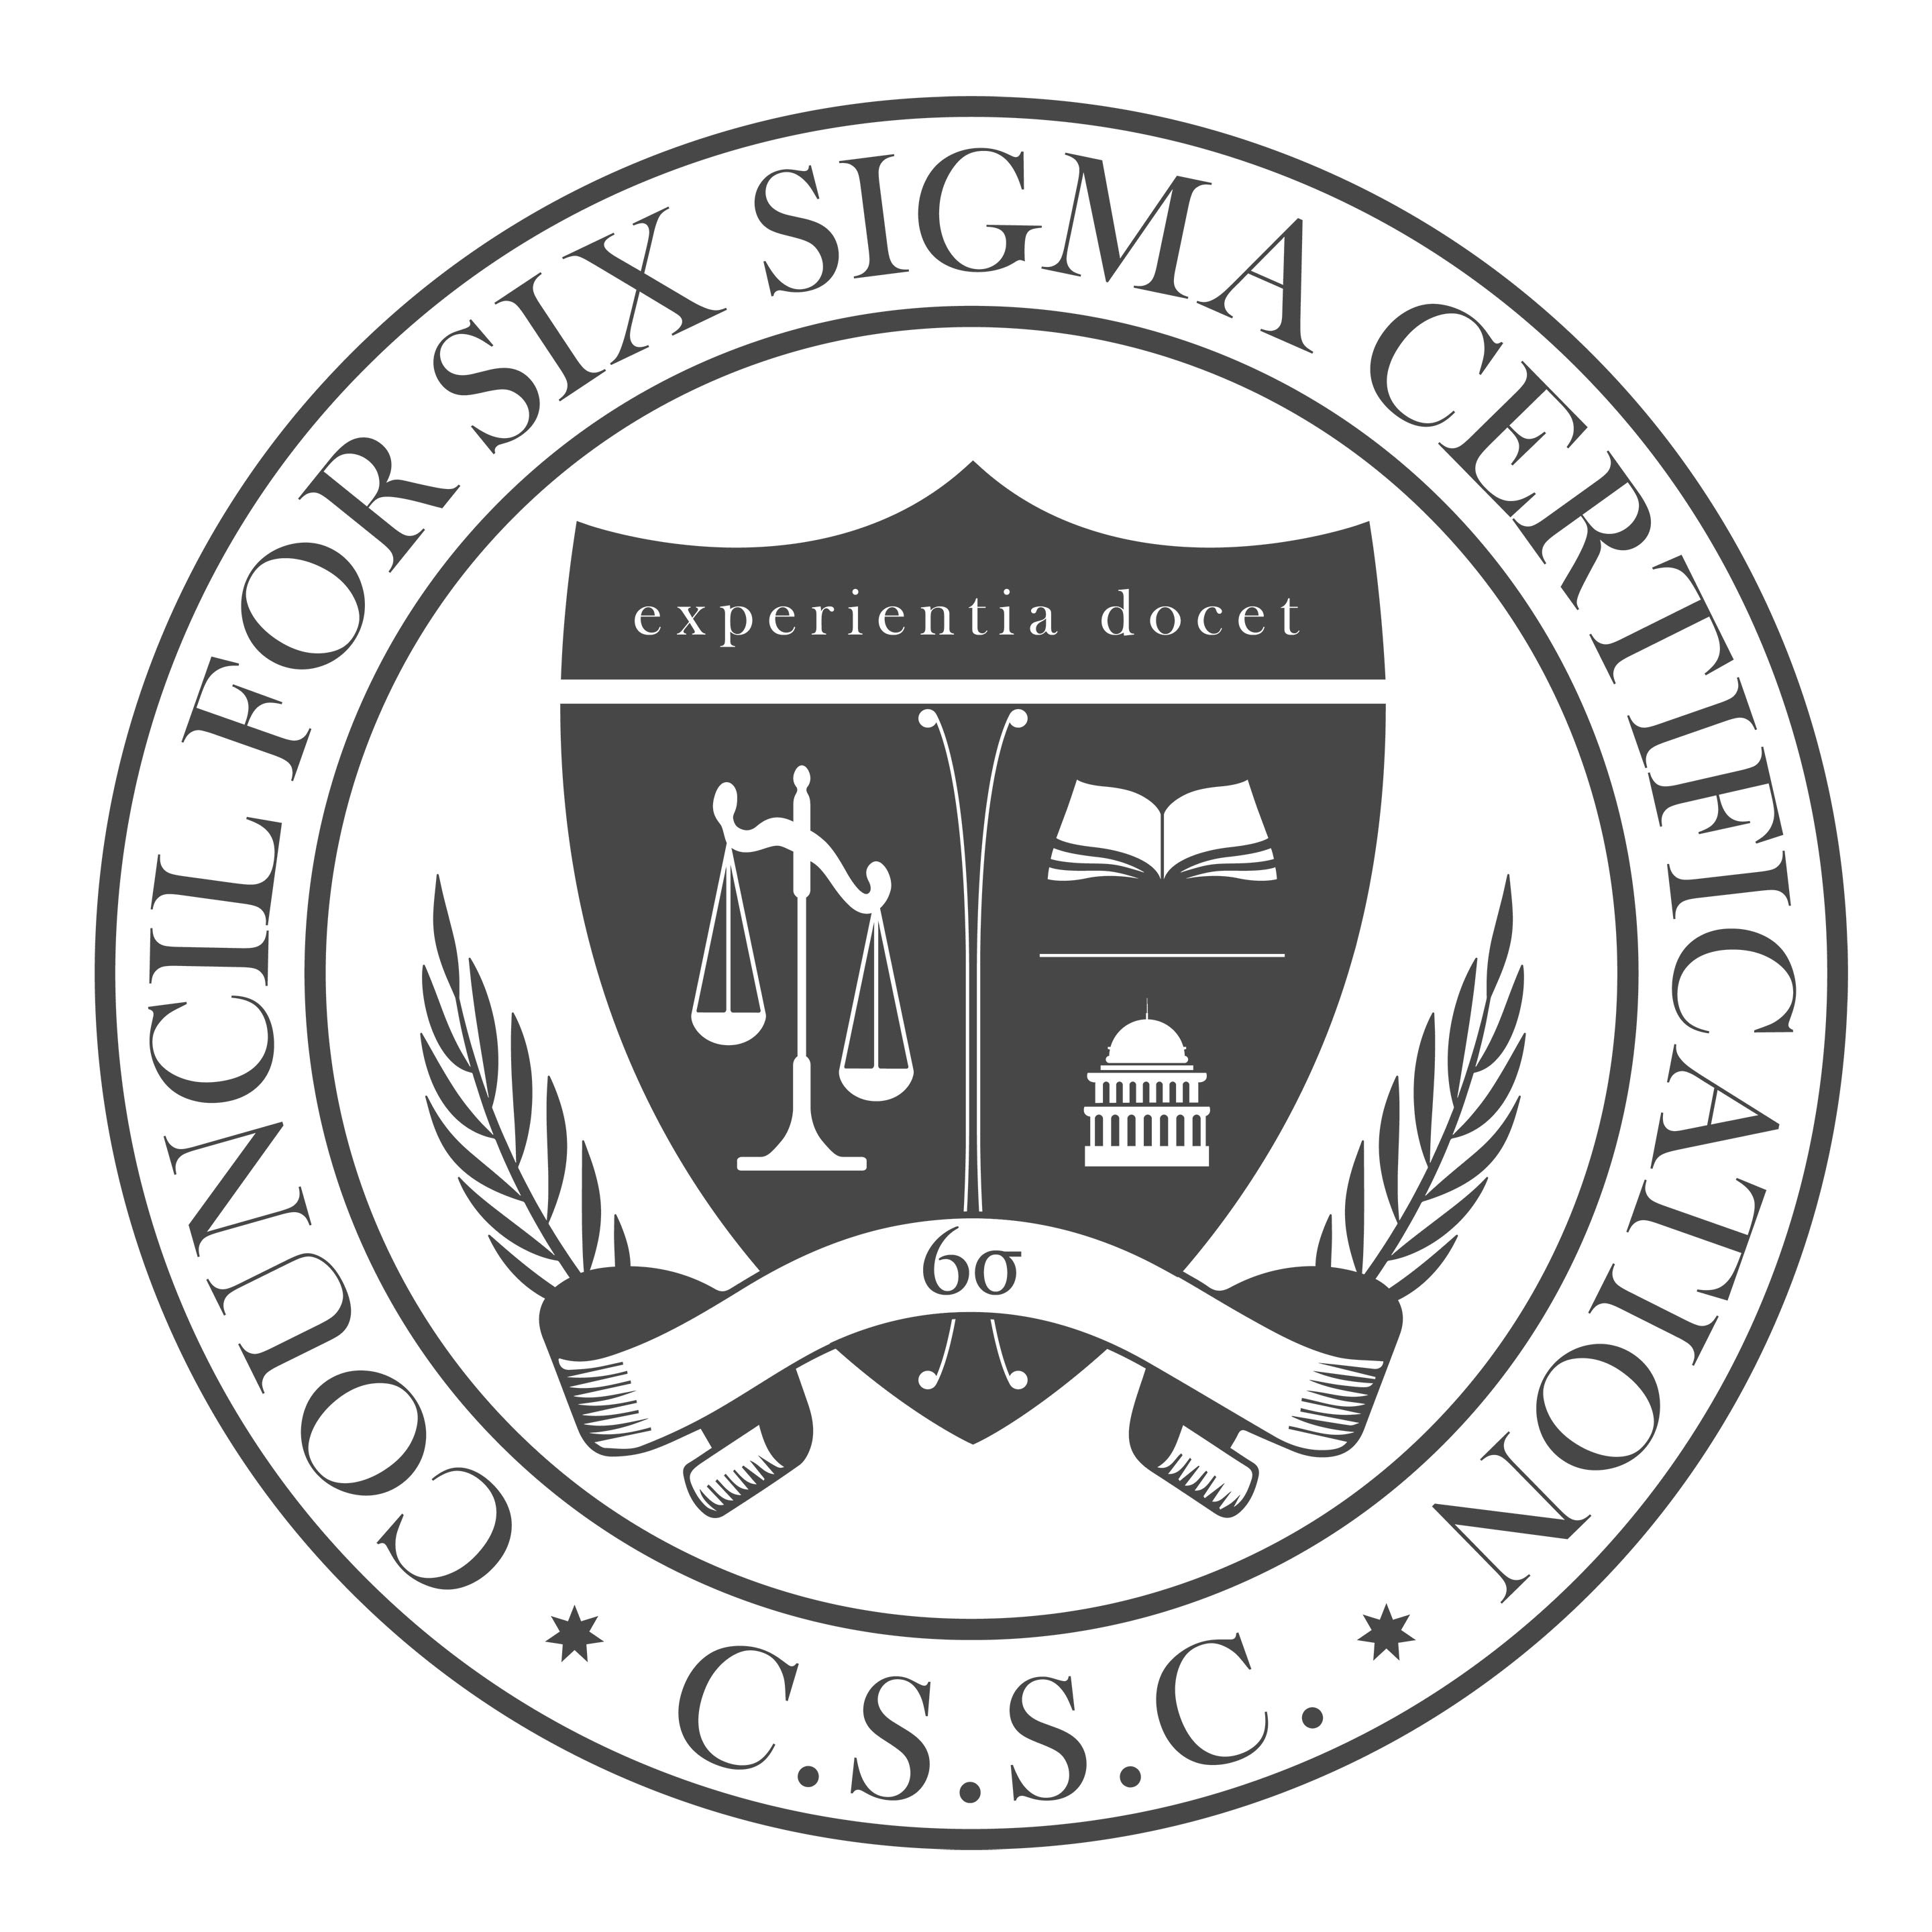 Accredited by Council for Six Sigma Certification